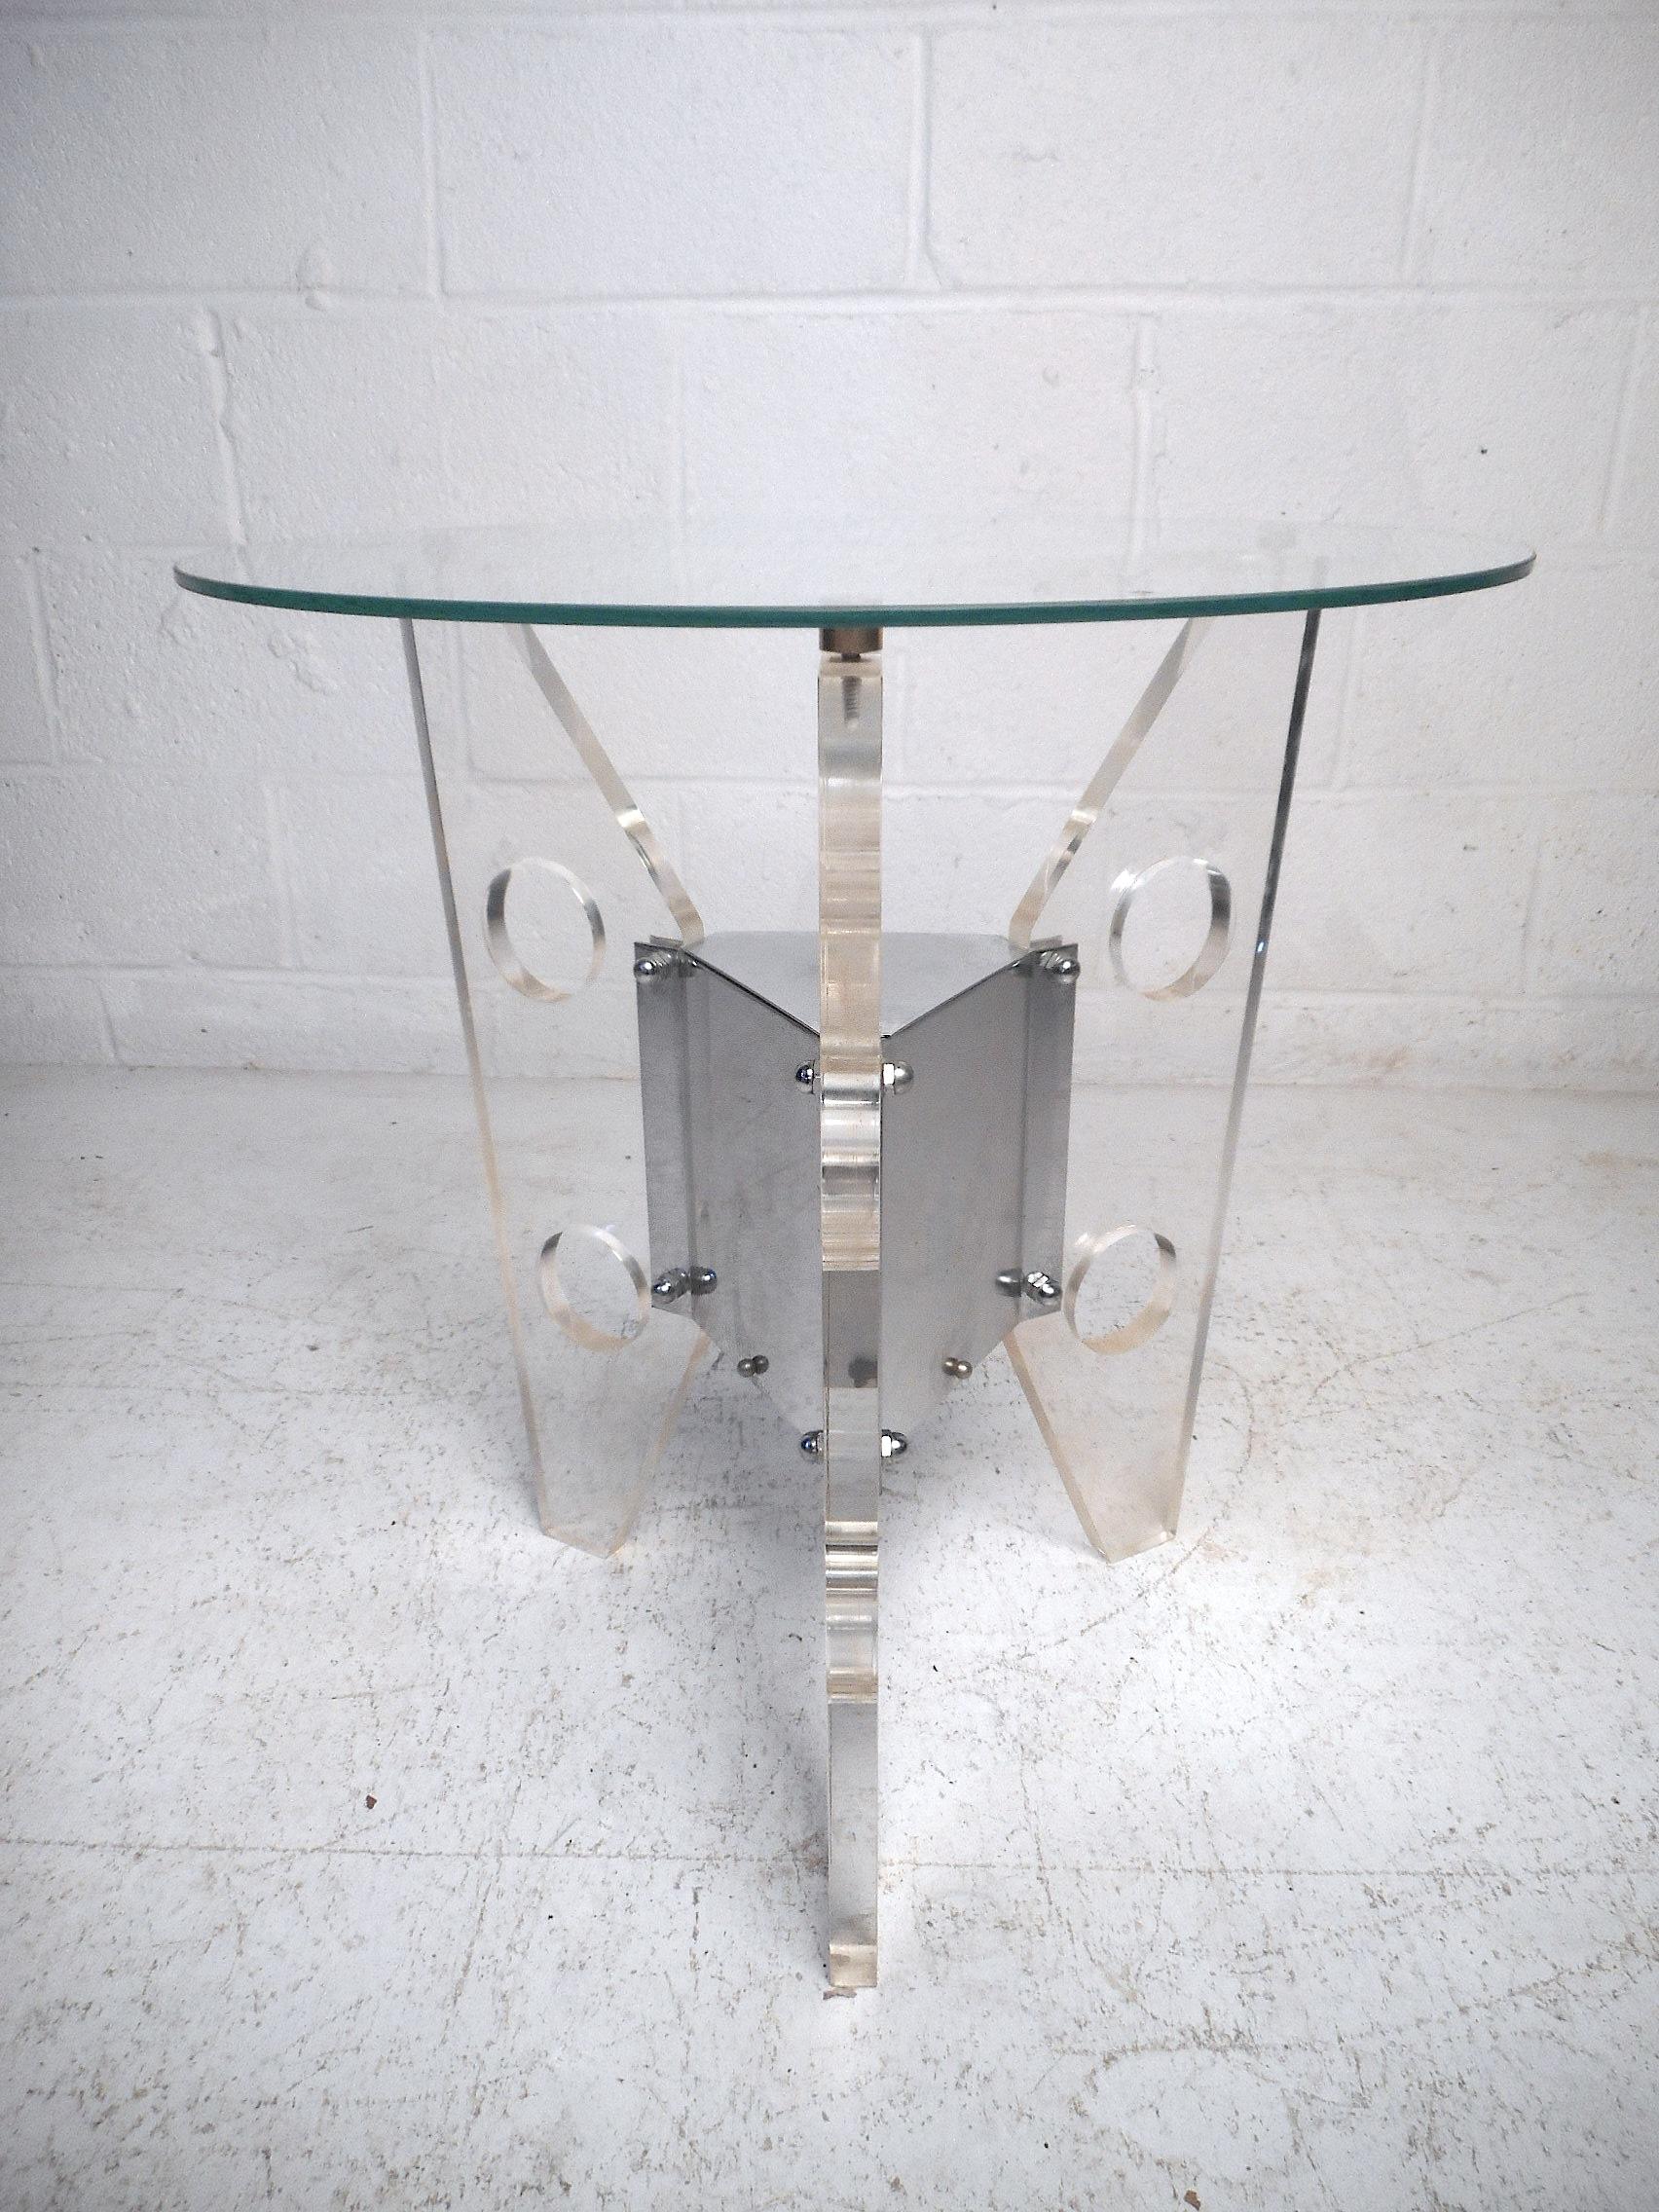 This unusual midcentury end table features a stylish three-piece Lucite base with a bold chrome centerpiece and a round bevelled glass tabletop. In the style of Charles Hollis Jones, this unique mid-century end table is sure to make an impression in